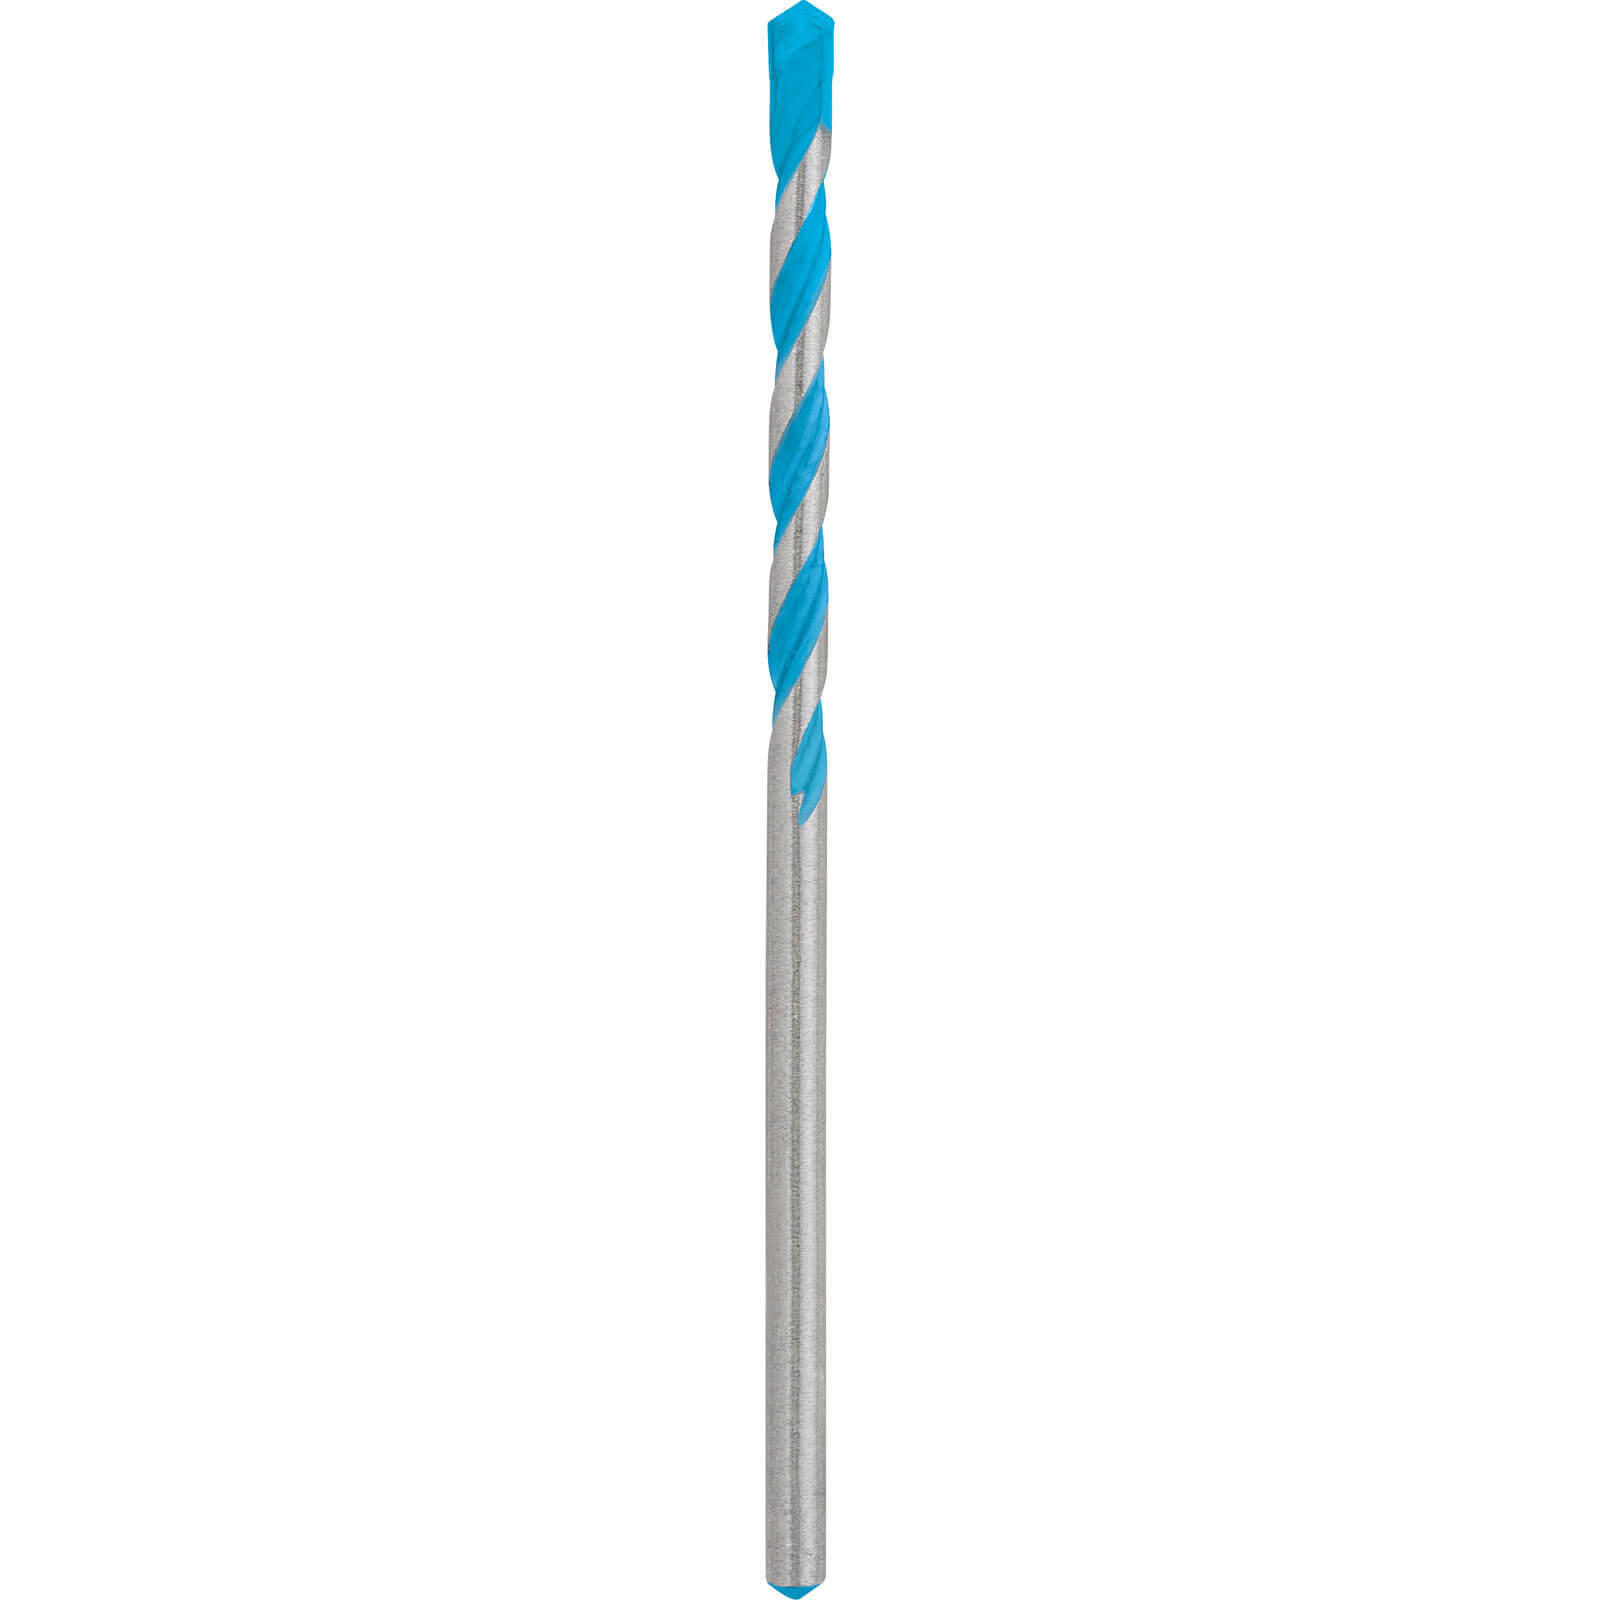 Photo of Bosch Expert Cyl-9 Multi Construction Drill Bit 14mm 250mm Pack Of 1